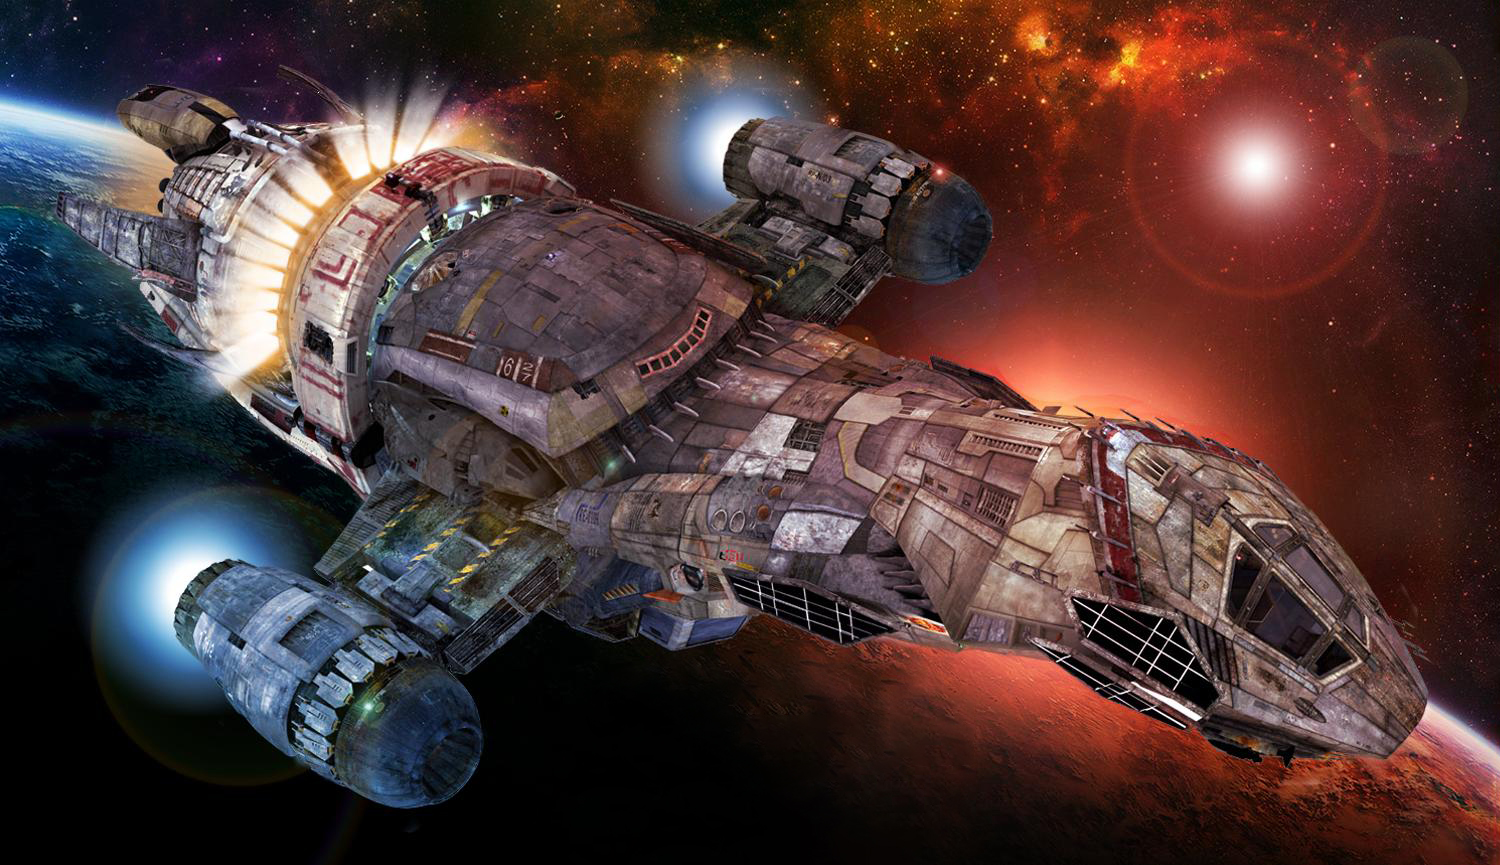 An artistic drawing of the spaceship Serenity from the TV show 'Firefly'